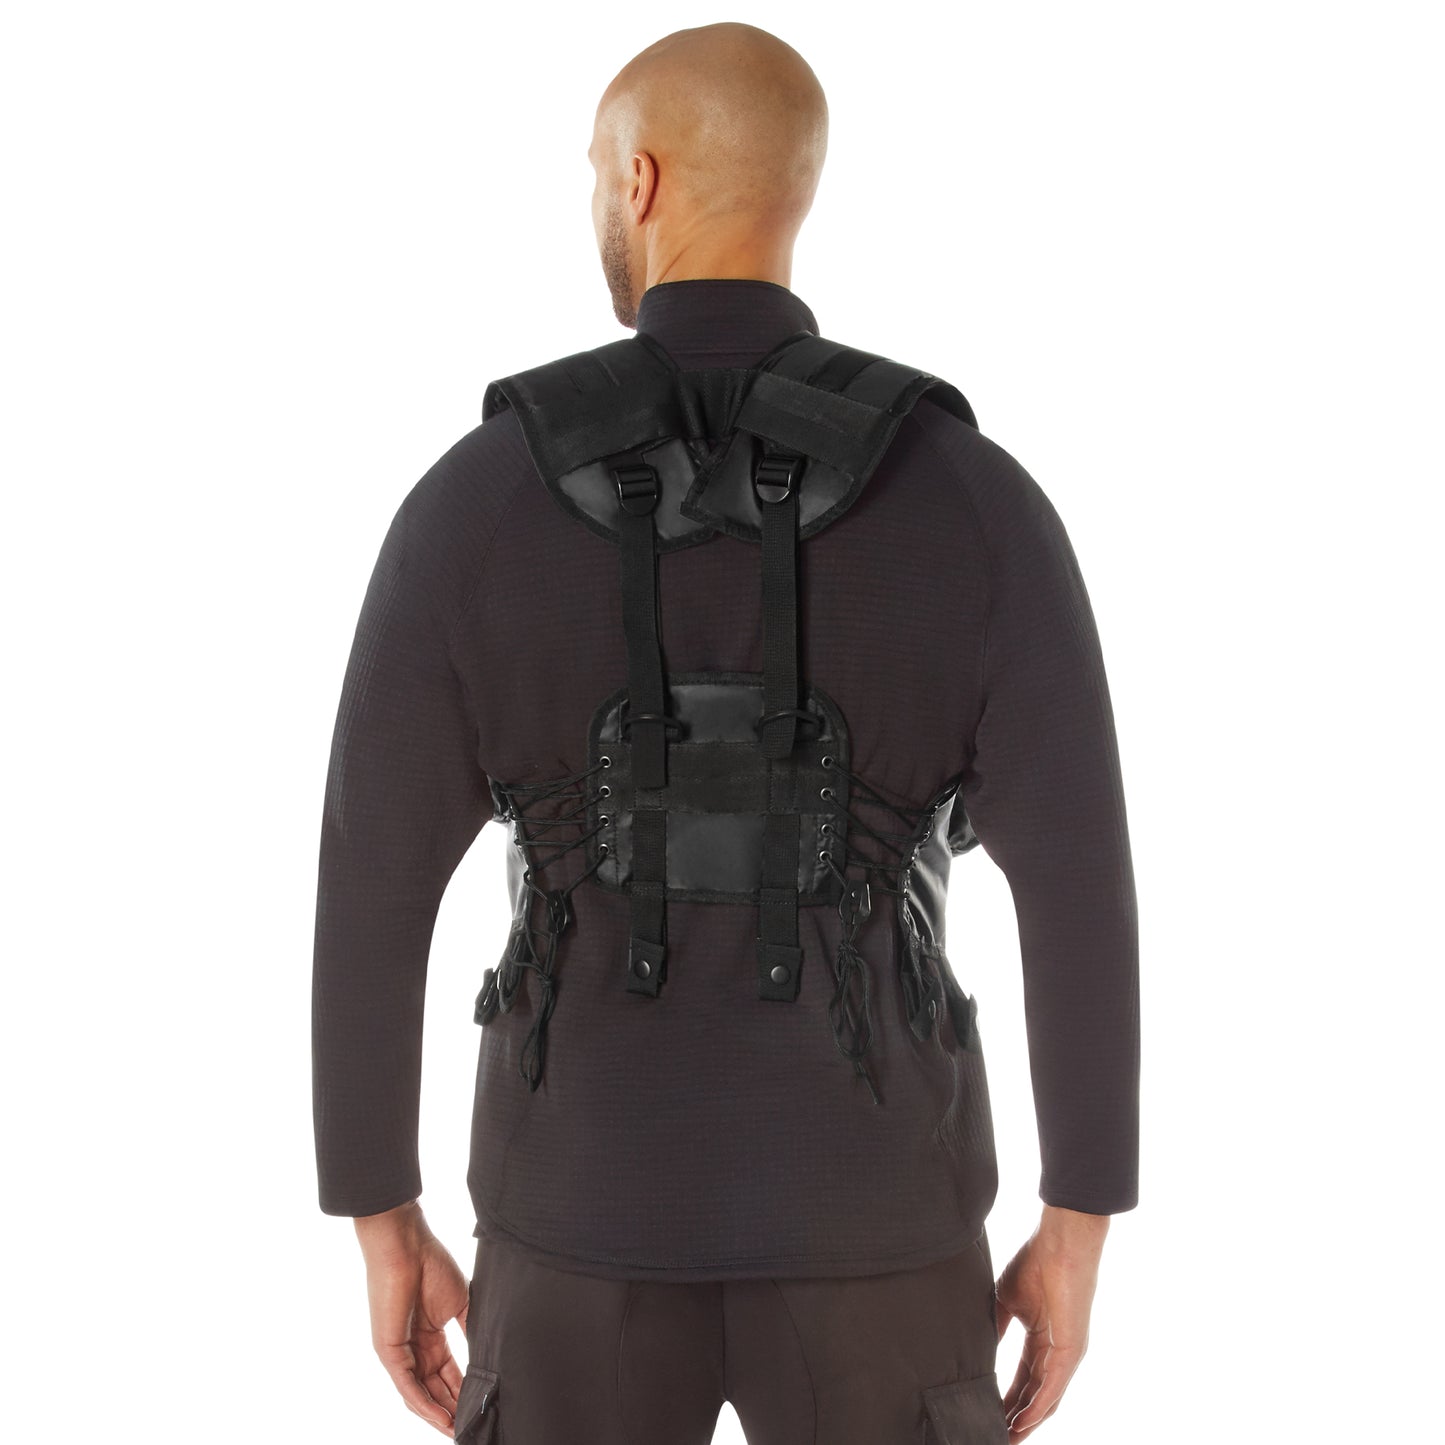 Rothco Tactical Assault Vest